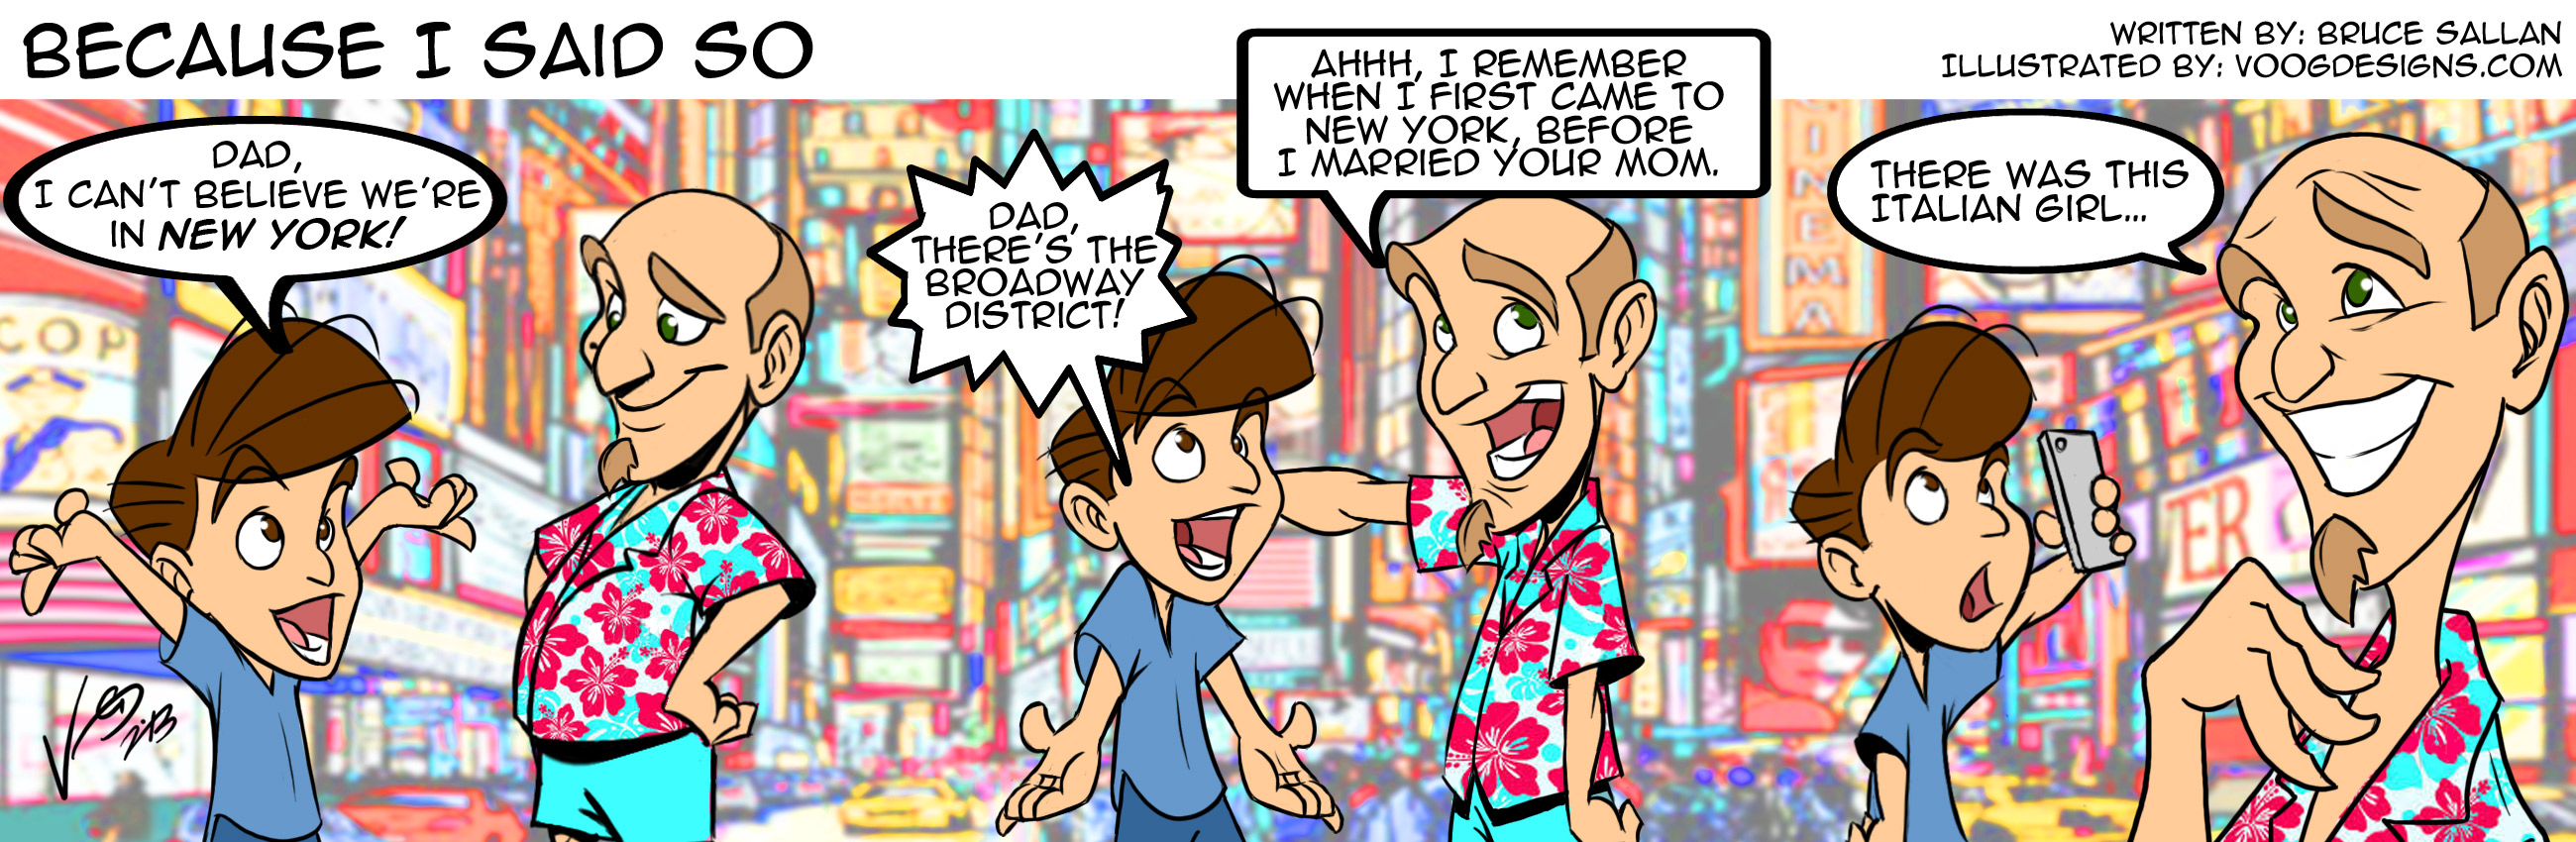 Dad and Son comic - On Broadway